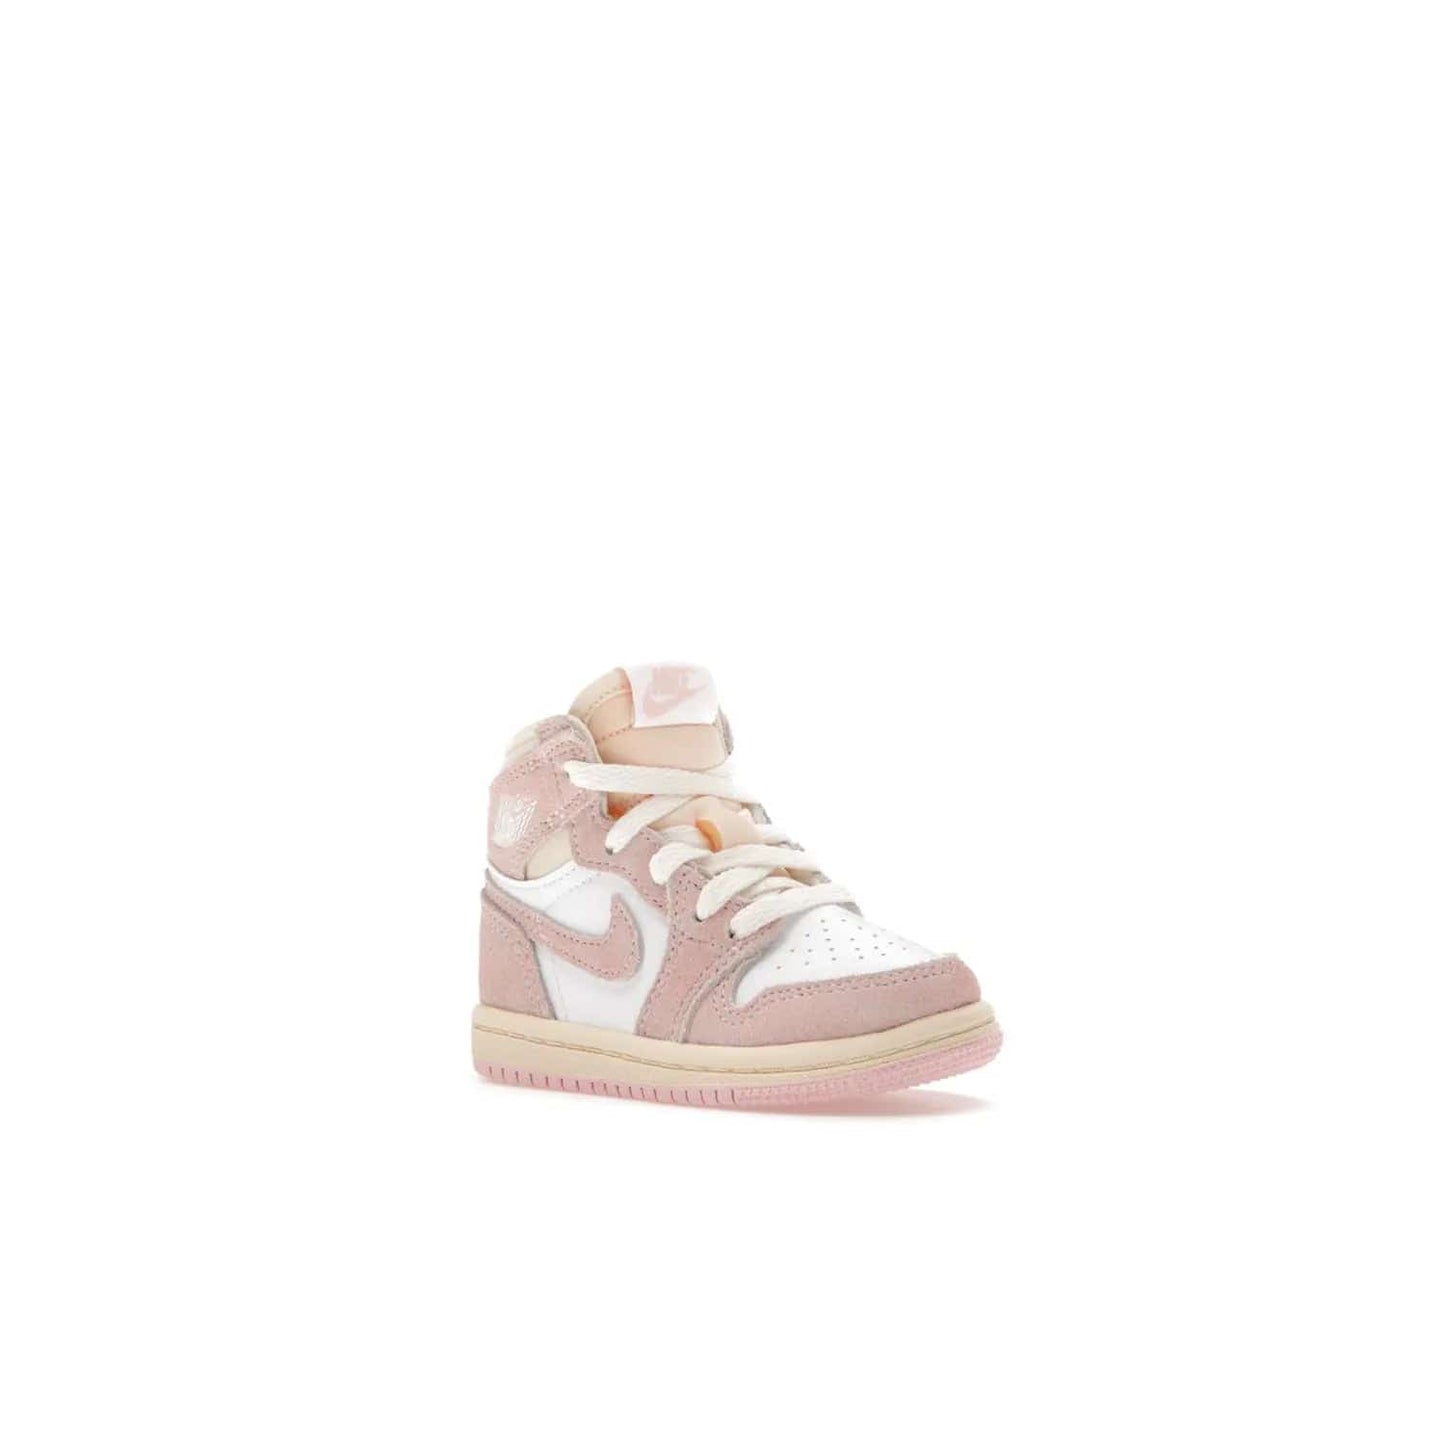 Jordan 1 Retro High OG Washed Pink (TD) - Image 5 - Only at www.BallersClubKickz.com - Retro style meets modern comfort: Introducing the Jordan 1 High OG Washed Pink (TD). Combining Atmosphere/White/Muslin/Sail colors with a high-rise silhouette, these shoes will be an instant classic when they release April 22, 2023.